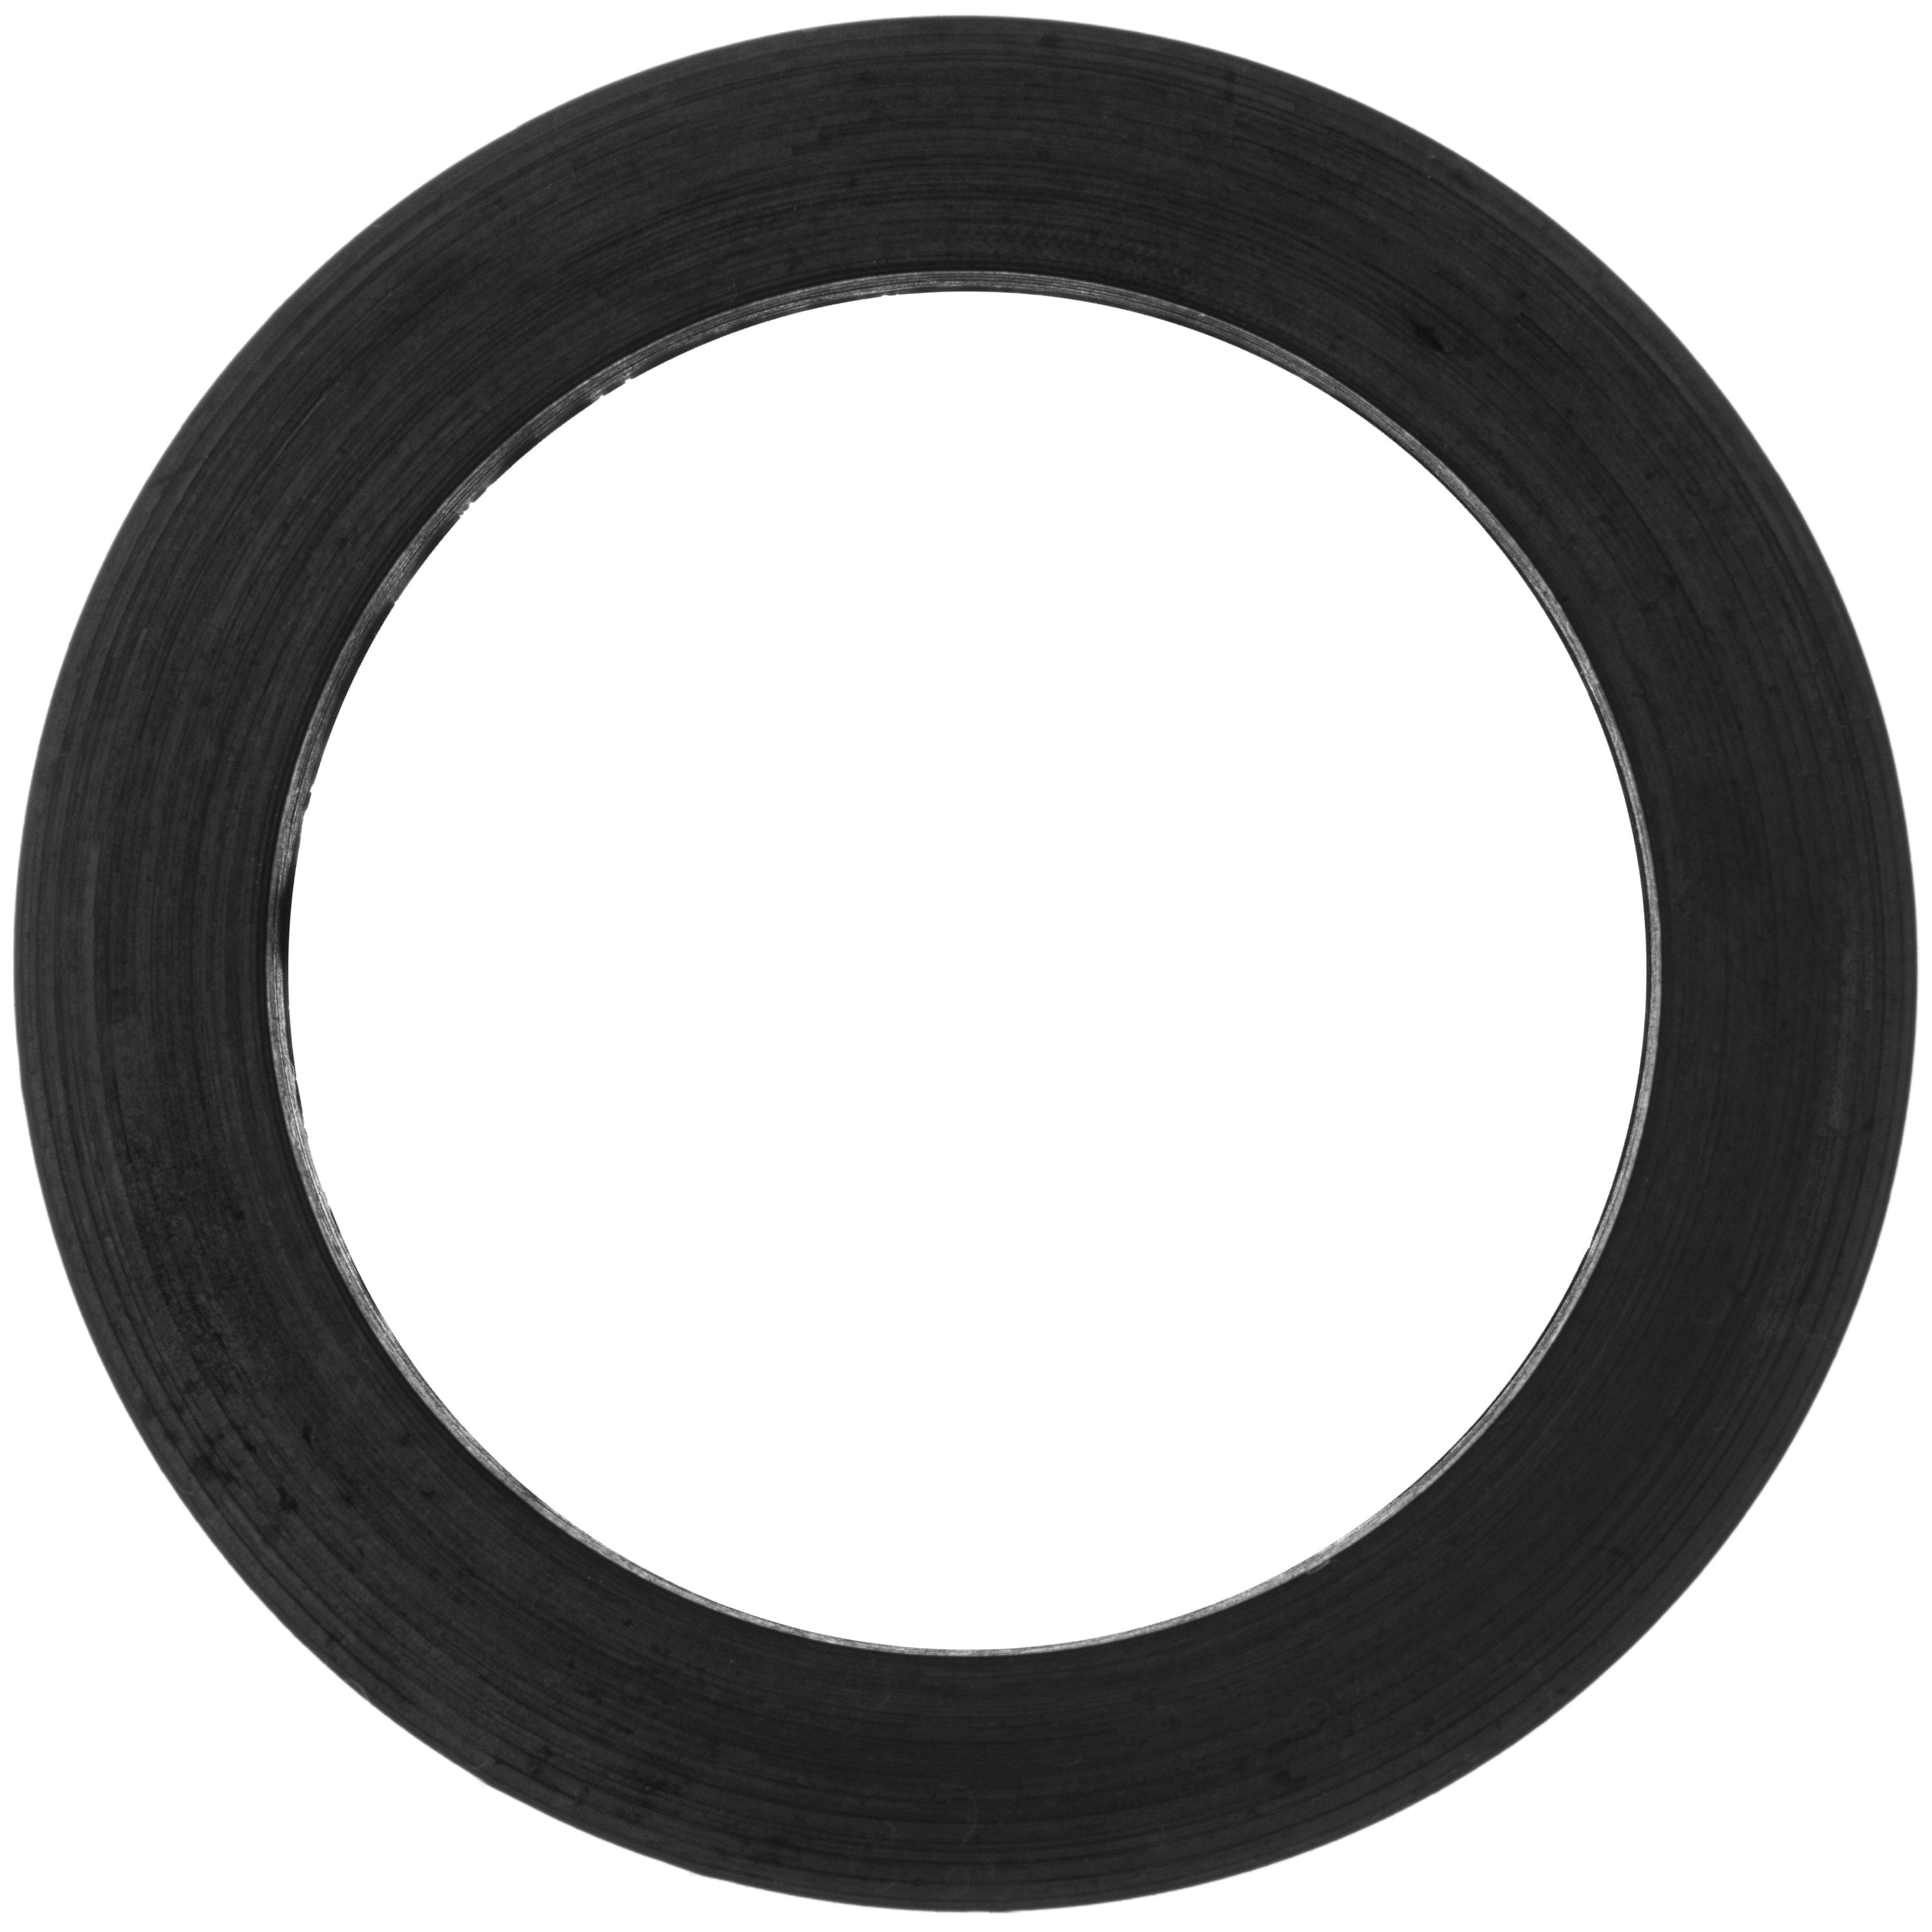 Black uxcell Rubber Oil Seal O Rings Gaskets Washers 10 Piece 29mm x 2.5mm